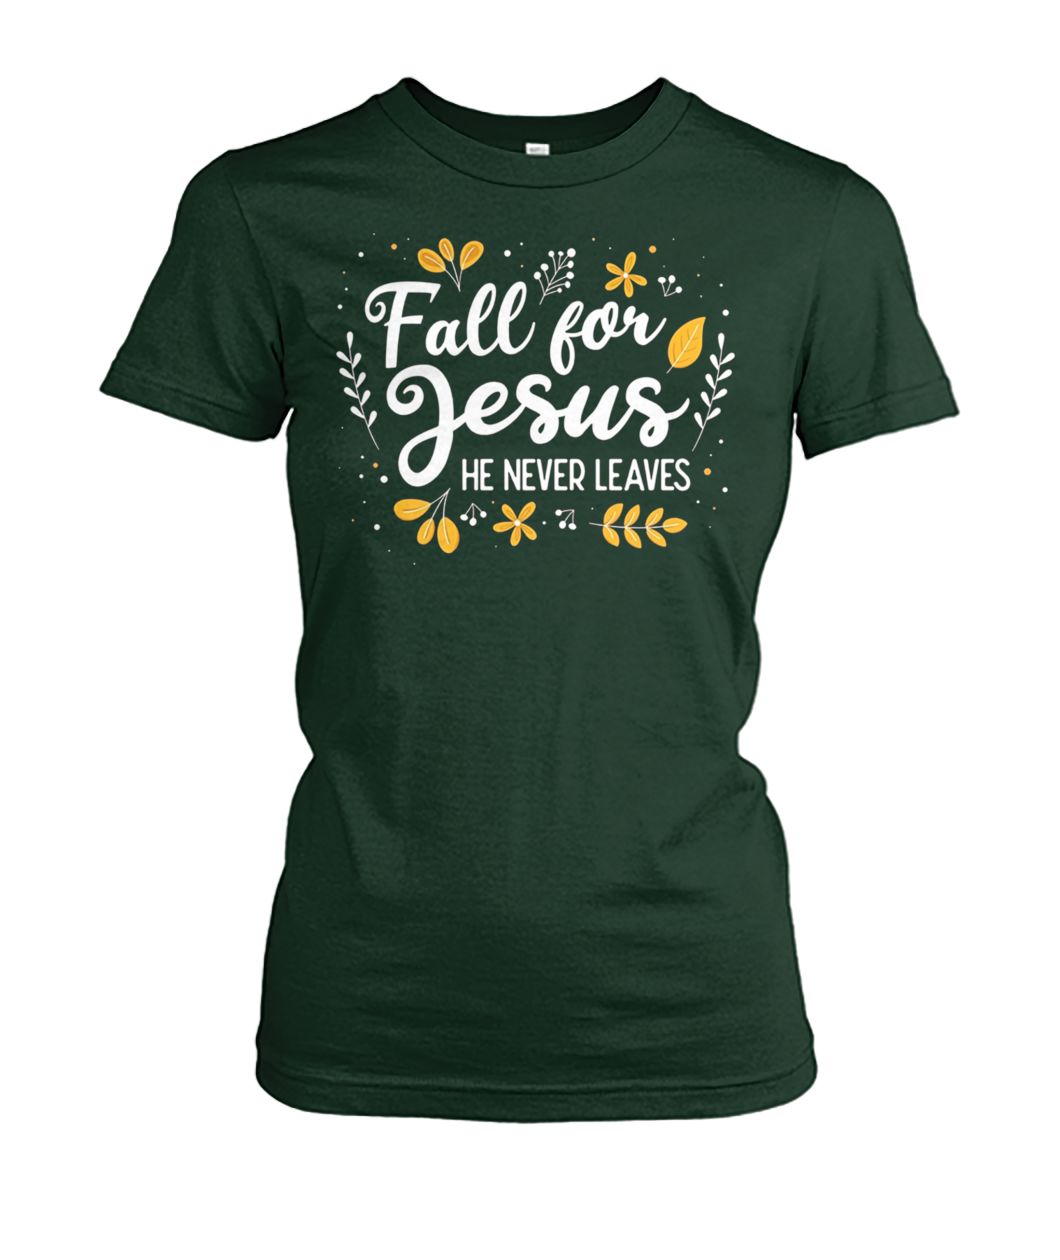 Fall for jesus he never leaves women's crew tee